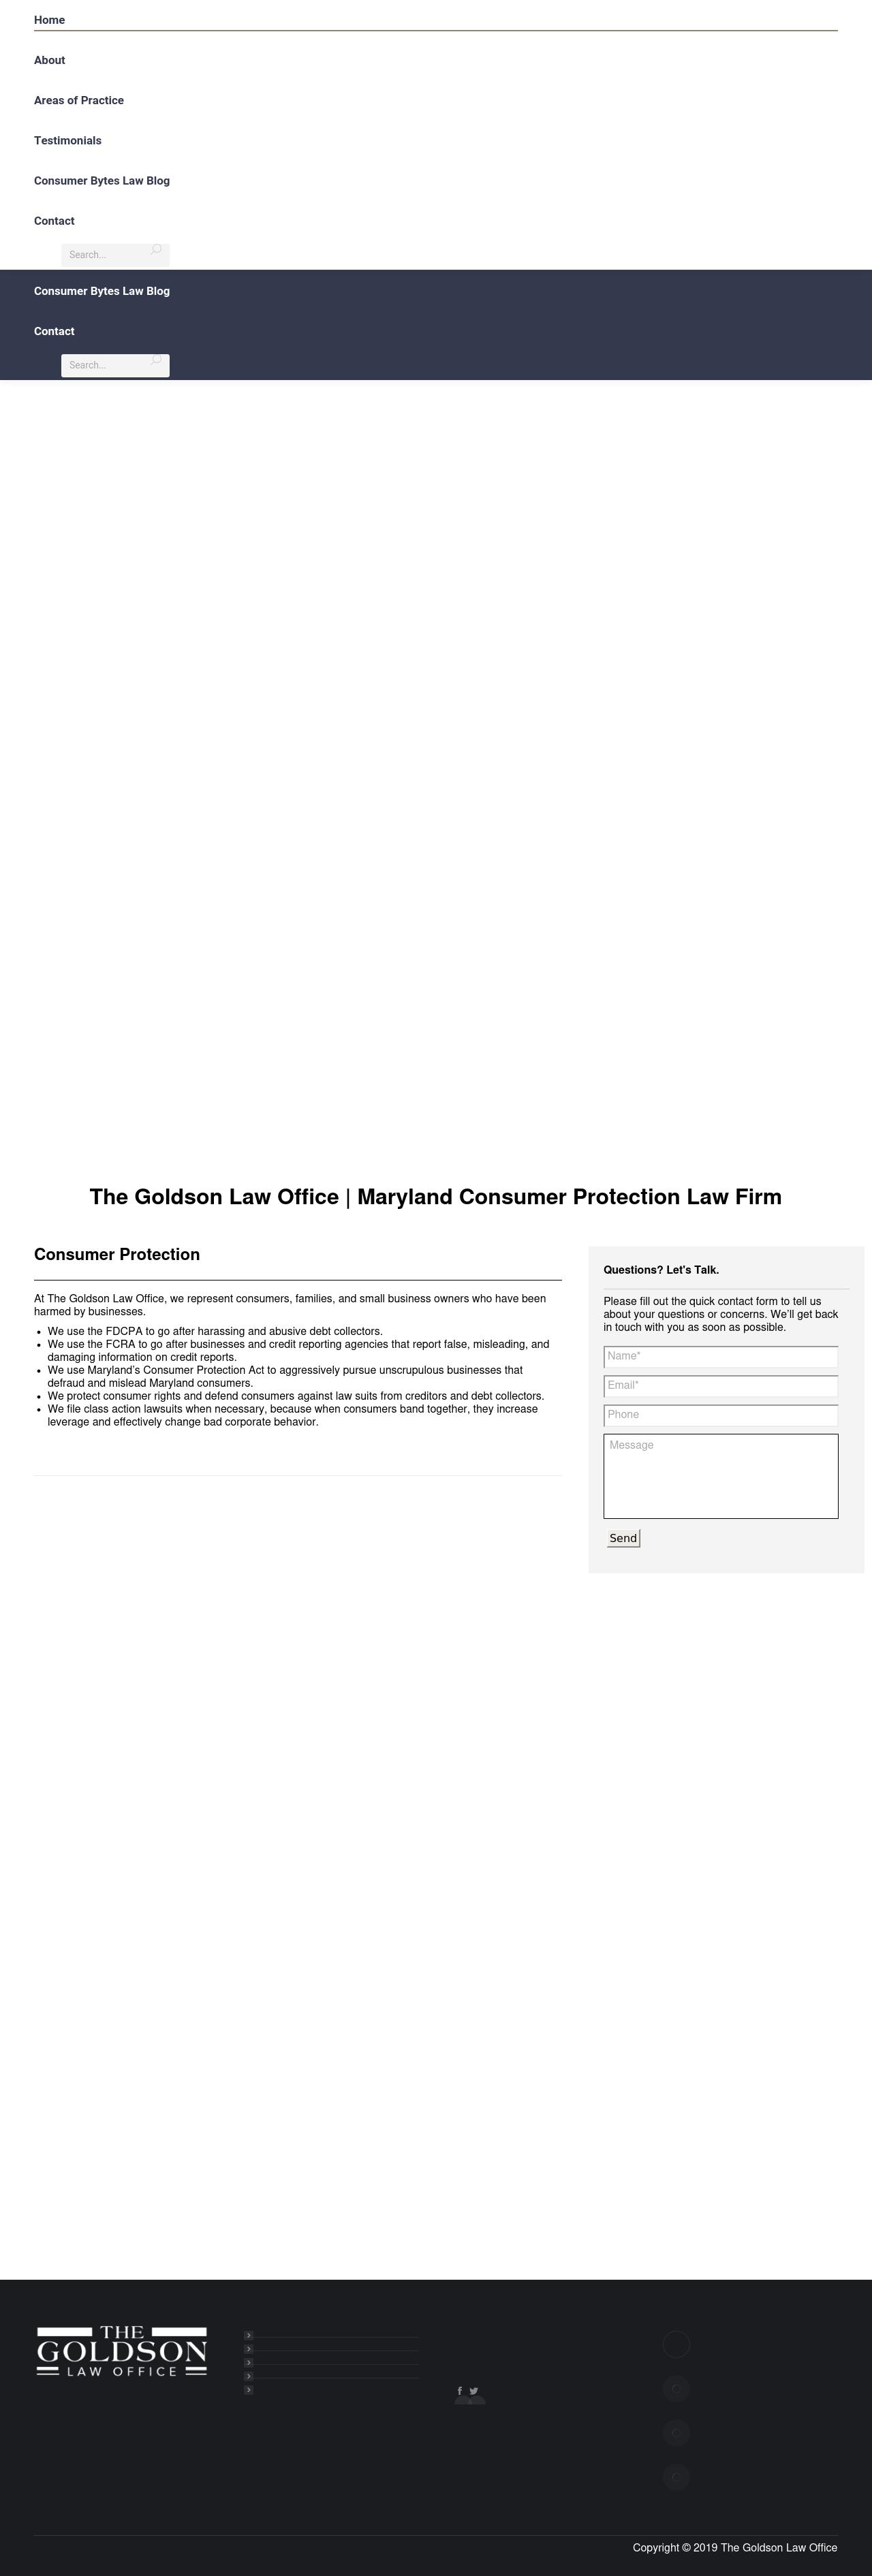 The Goldson Law Office, LLC - Silver Spring MD Lawyers